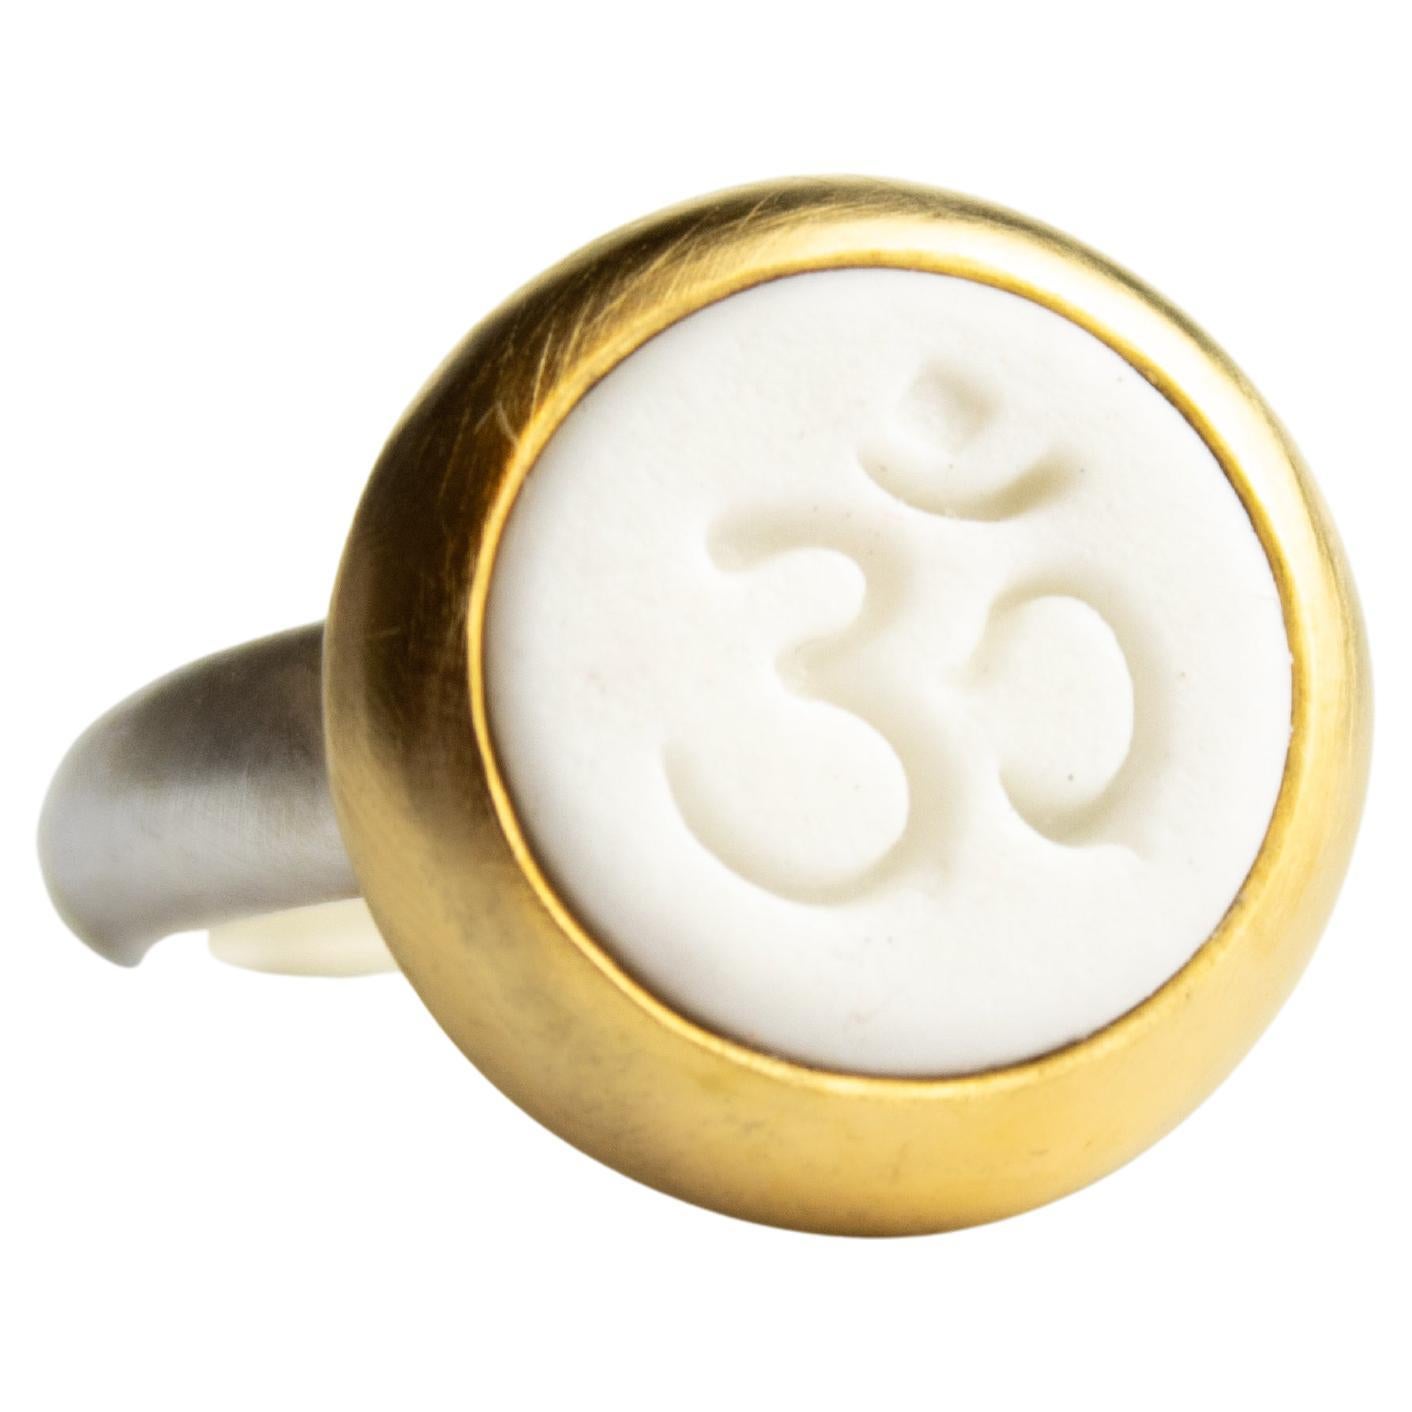 For Sale:  Monika Herré porcelain Ring OHM Symbol Large sterling-silver giold-plated